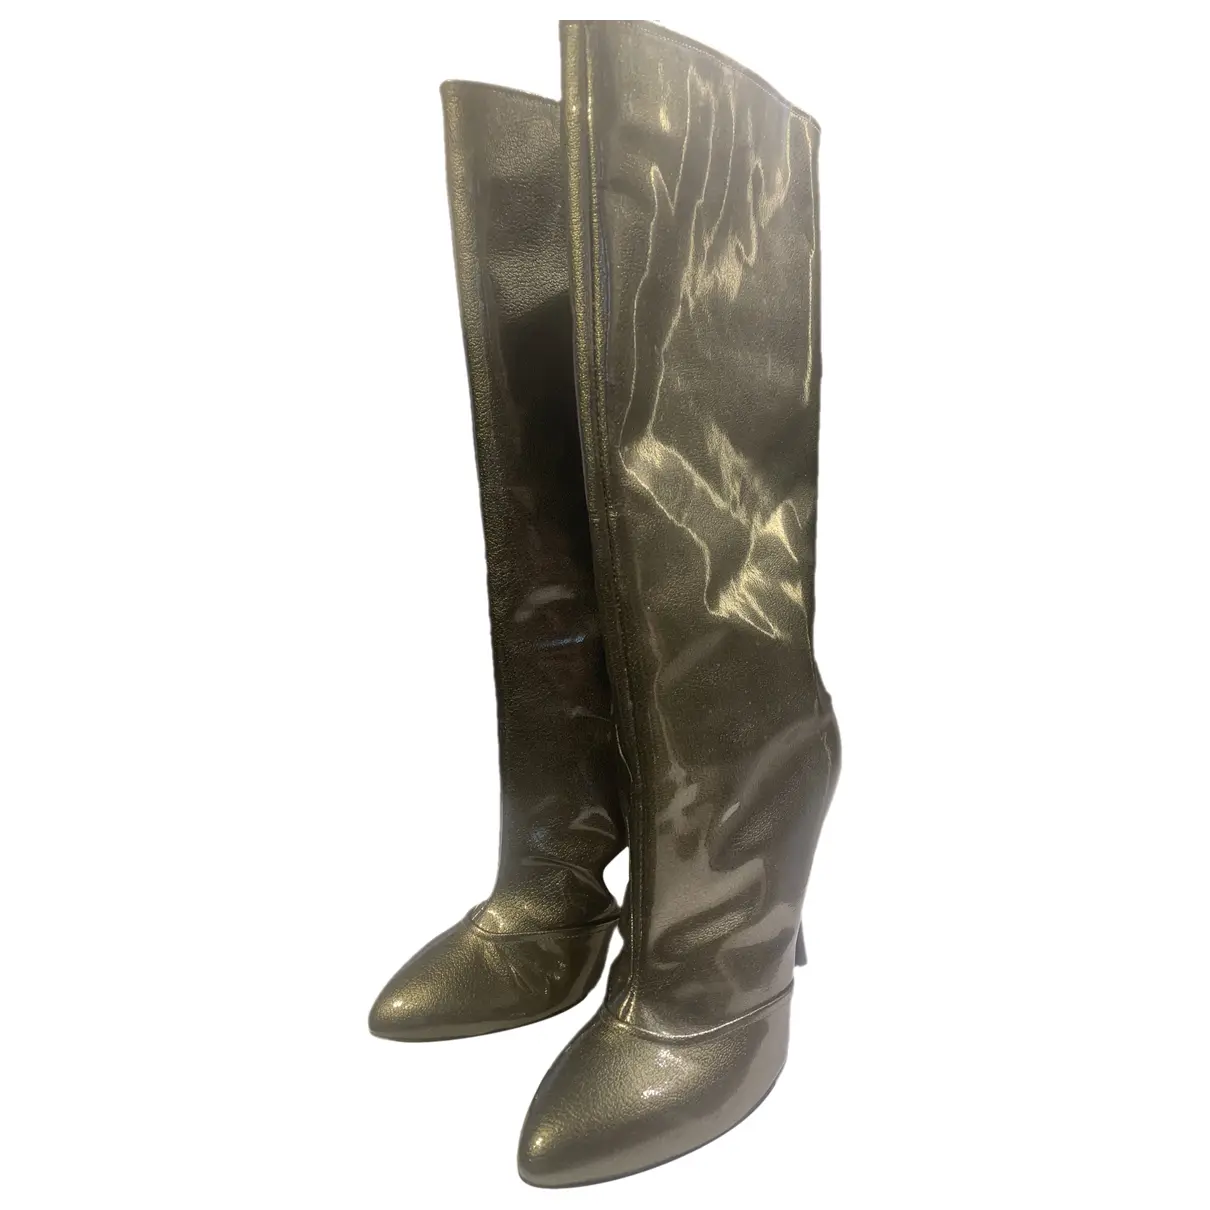 Patent leather boots